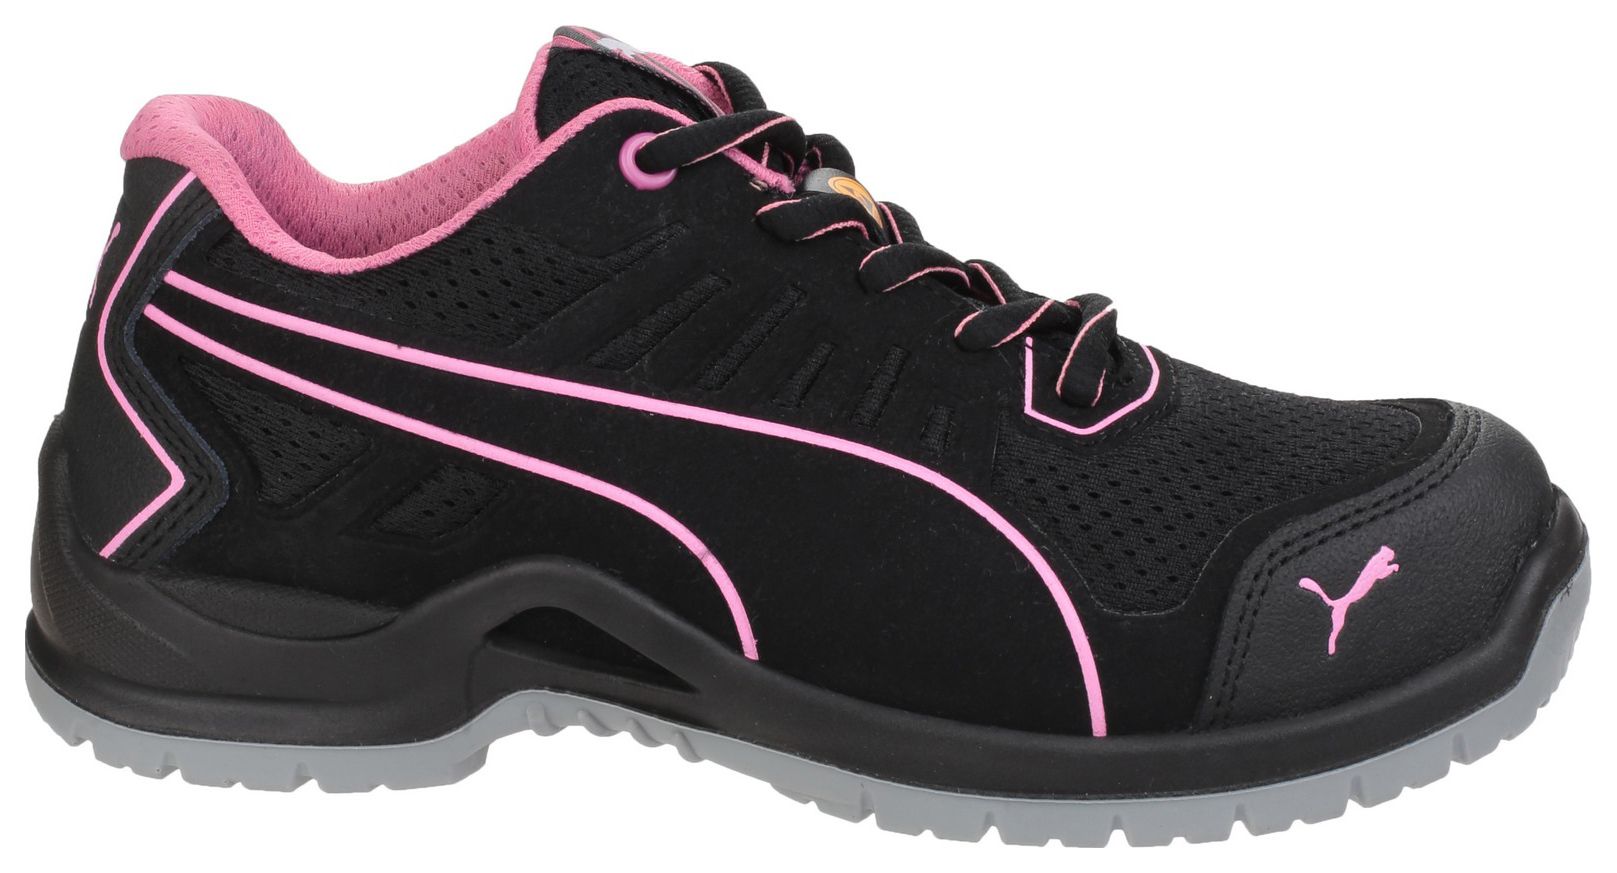 Puma Fuse Technic 644110 Womens Safety Trainers Black - Size 39